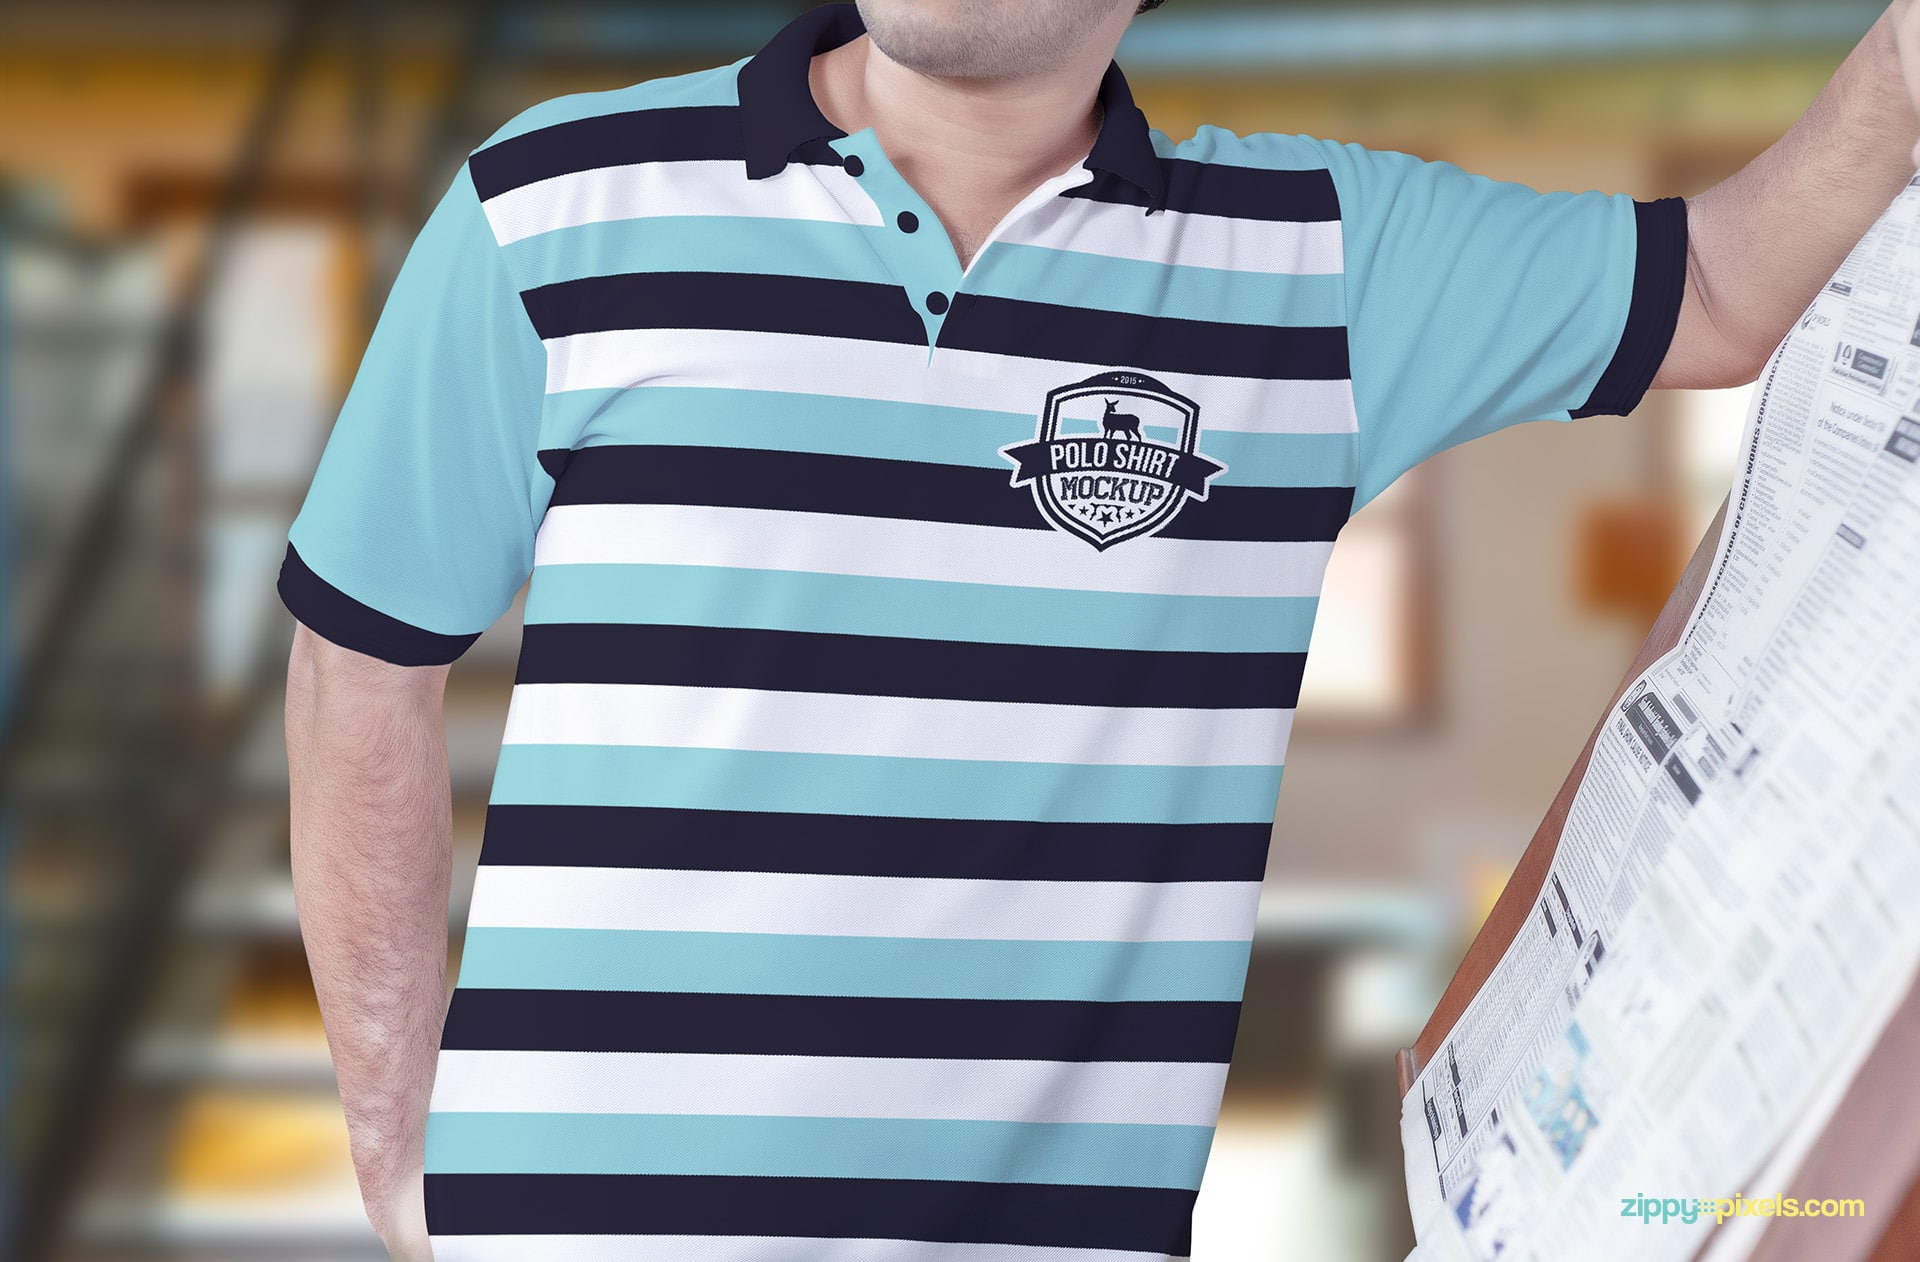 Download 13 Exceptional polo shirt mockups for your shirt designs ...